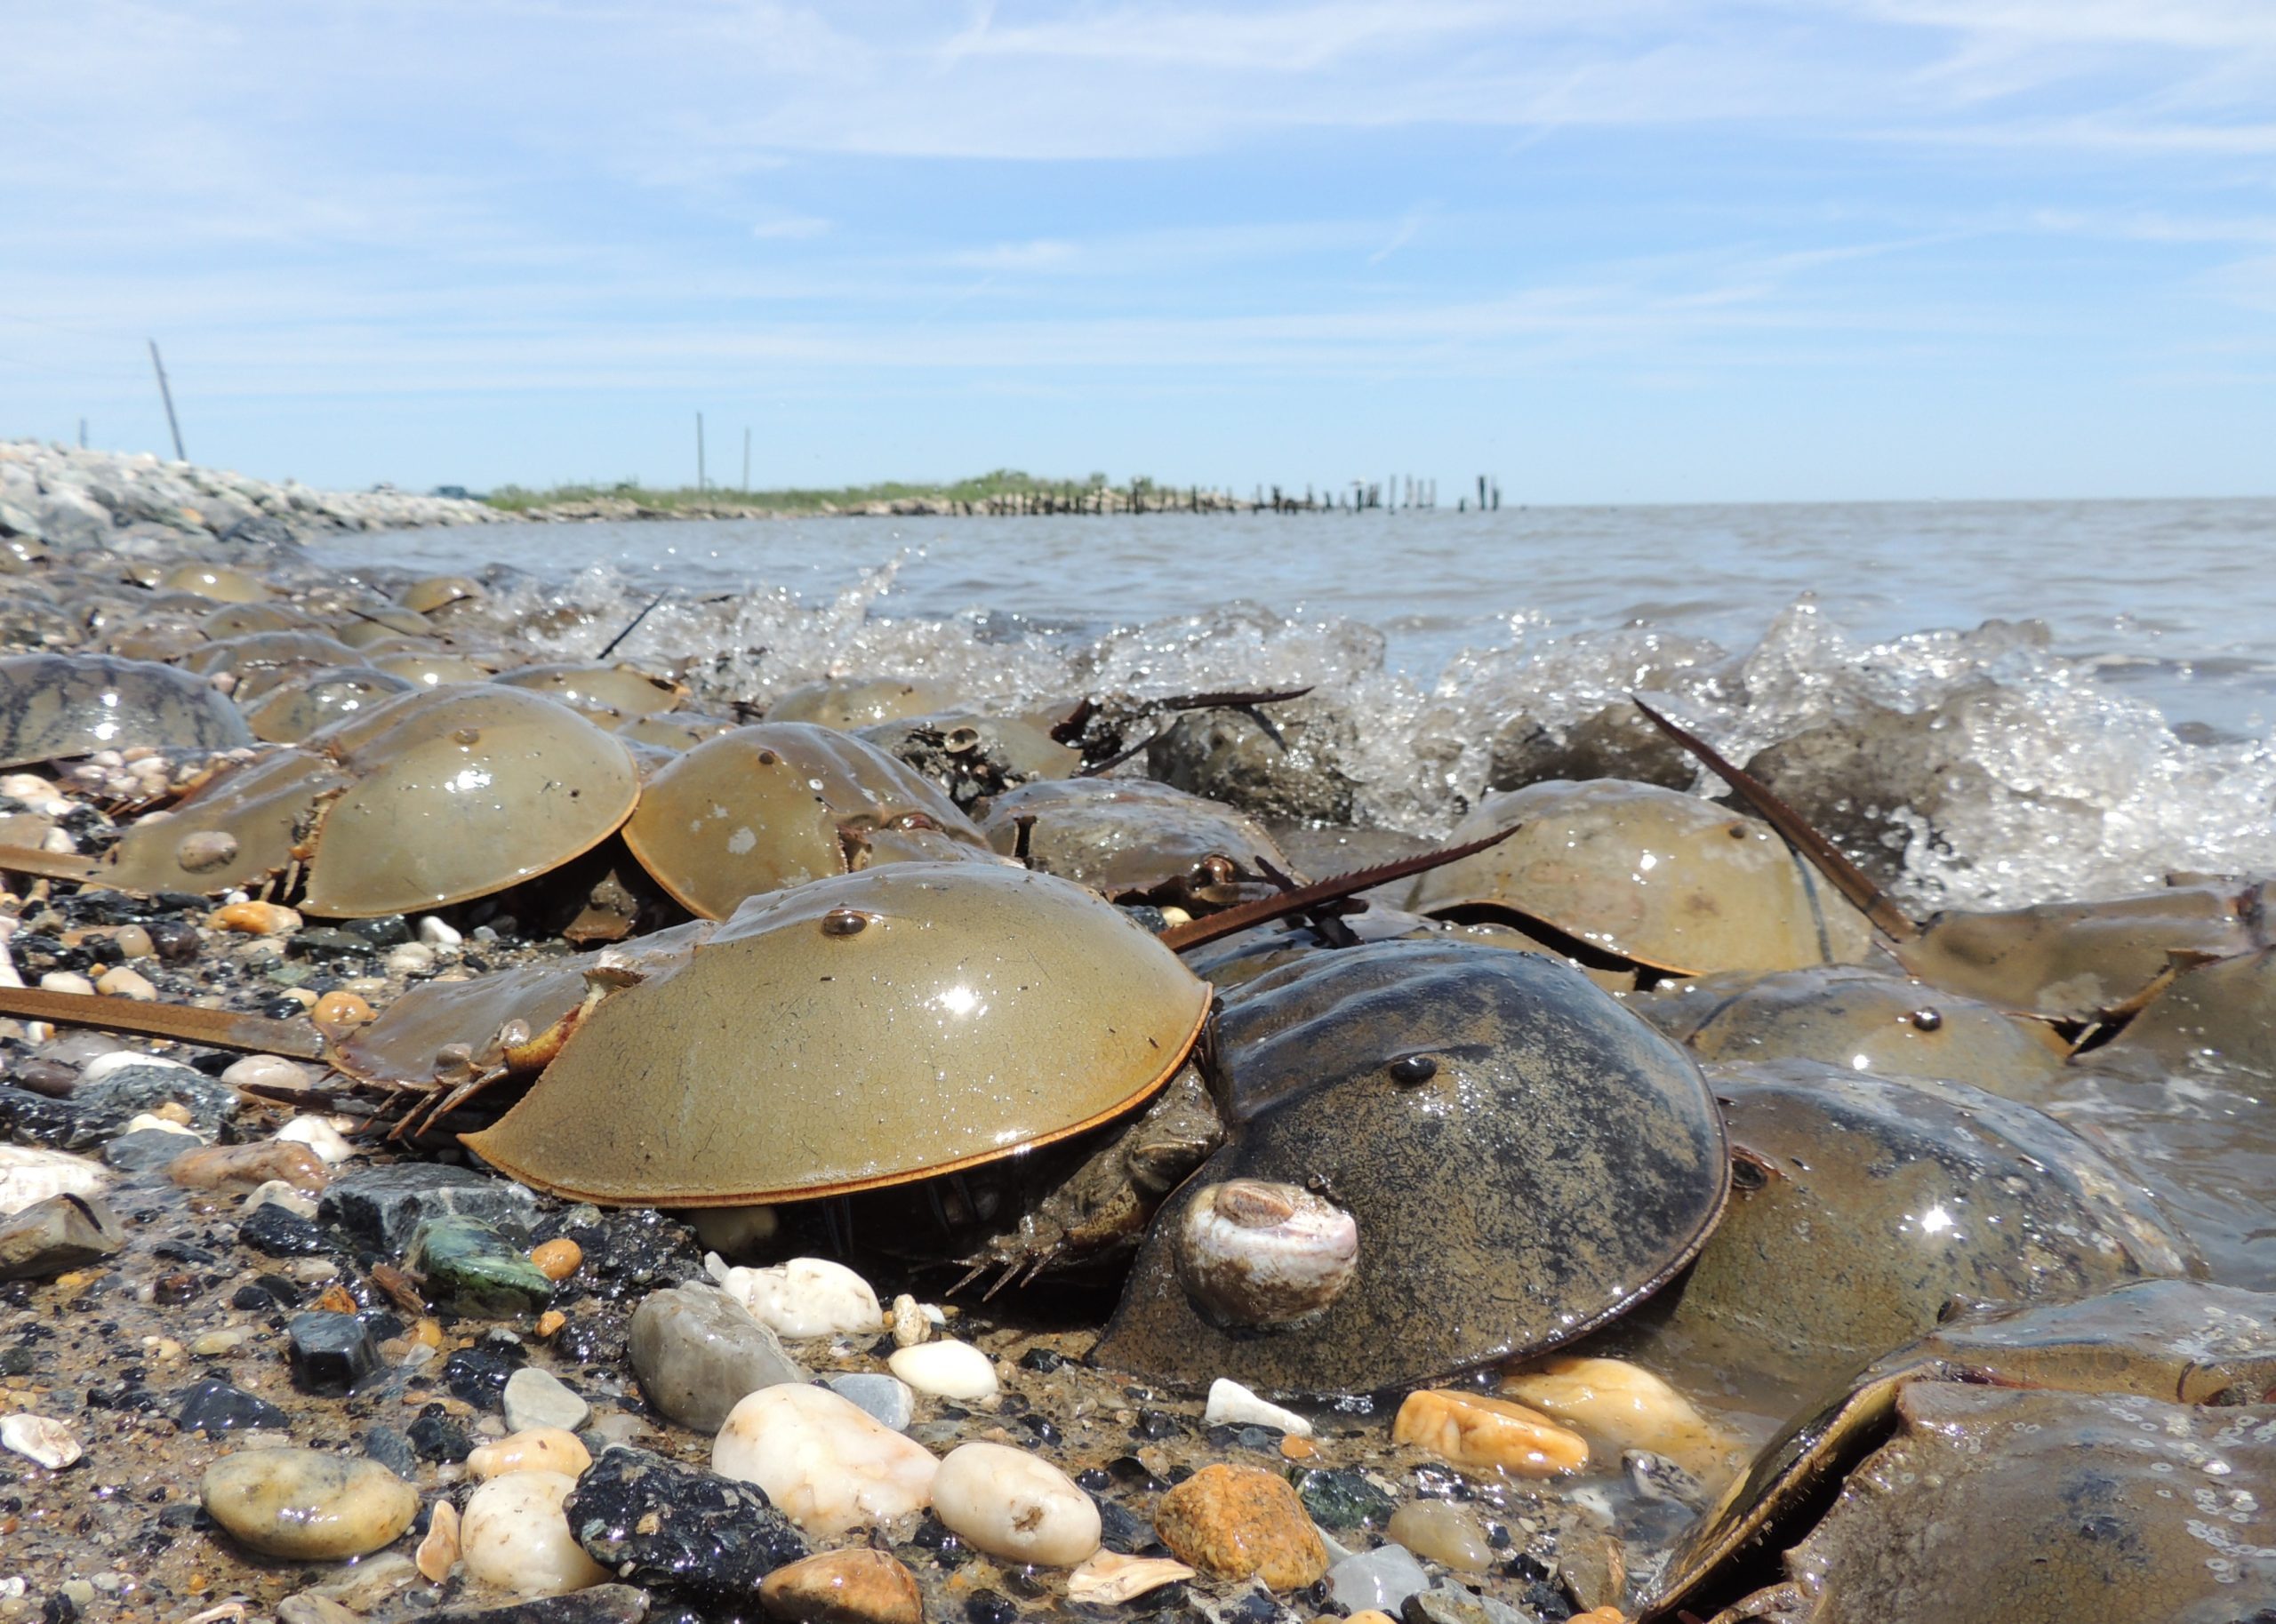 Horseshoe Crab Count - Photography by Jim White